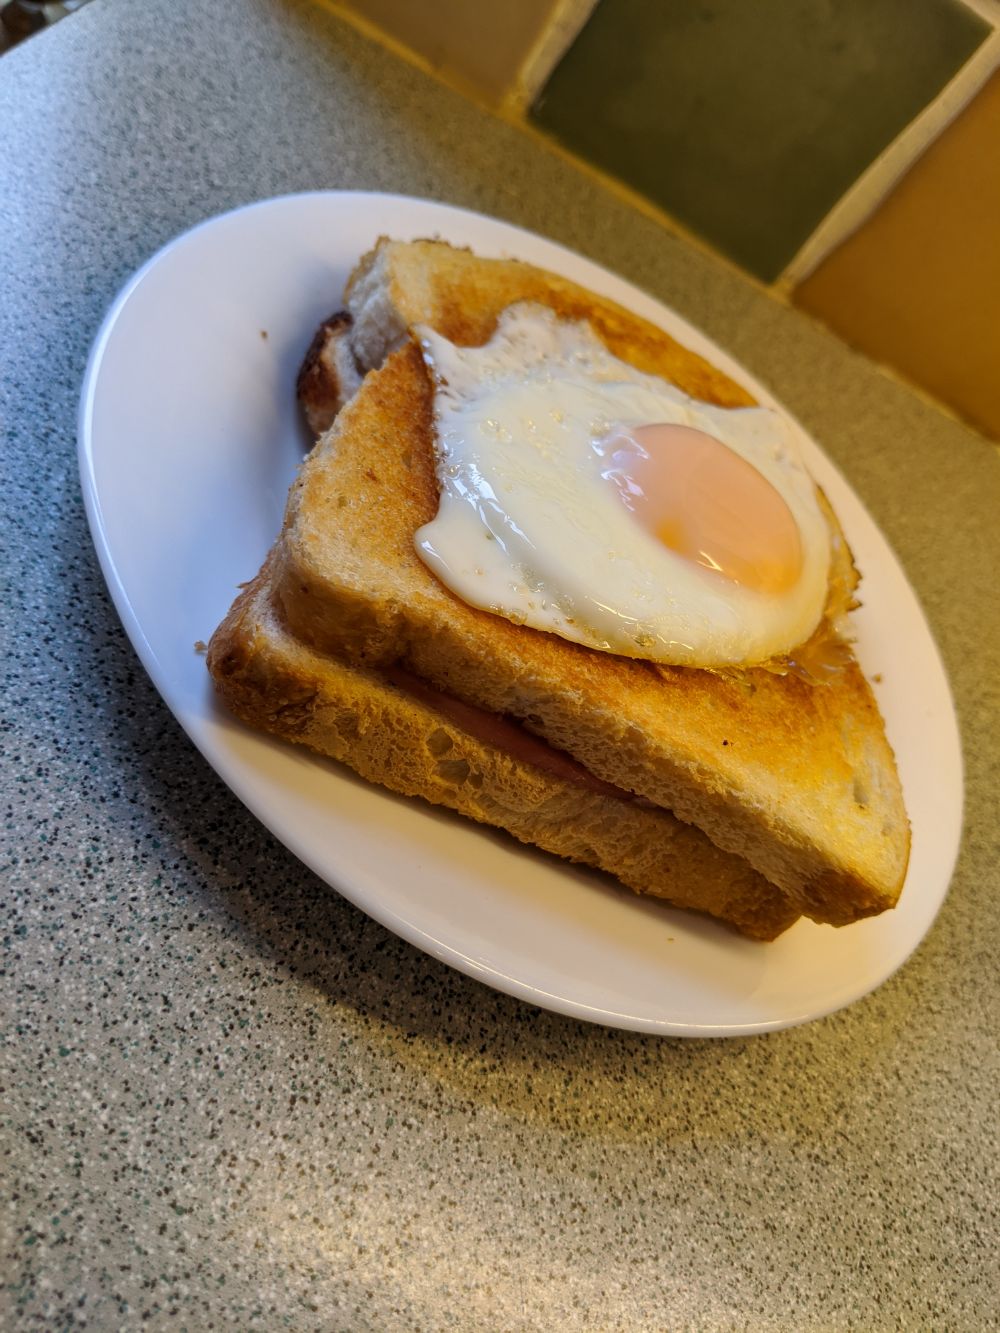 A yummy ham, tomato and cheese toasted sandwich topped with a fried egg